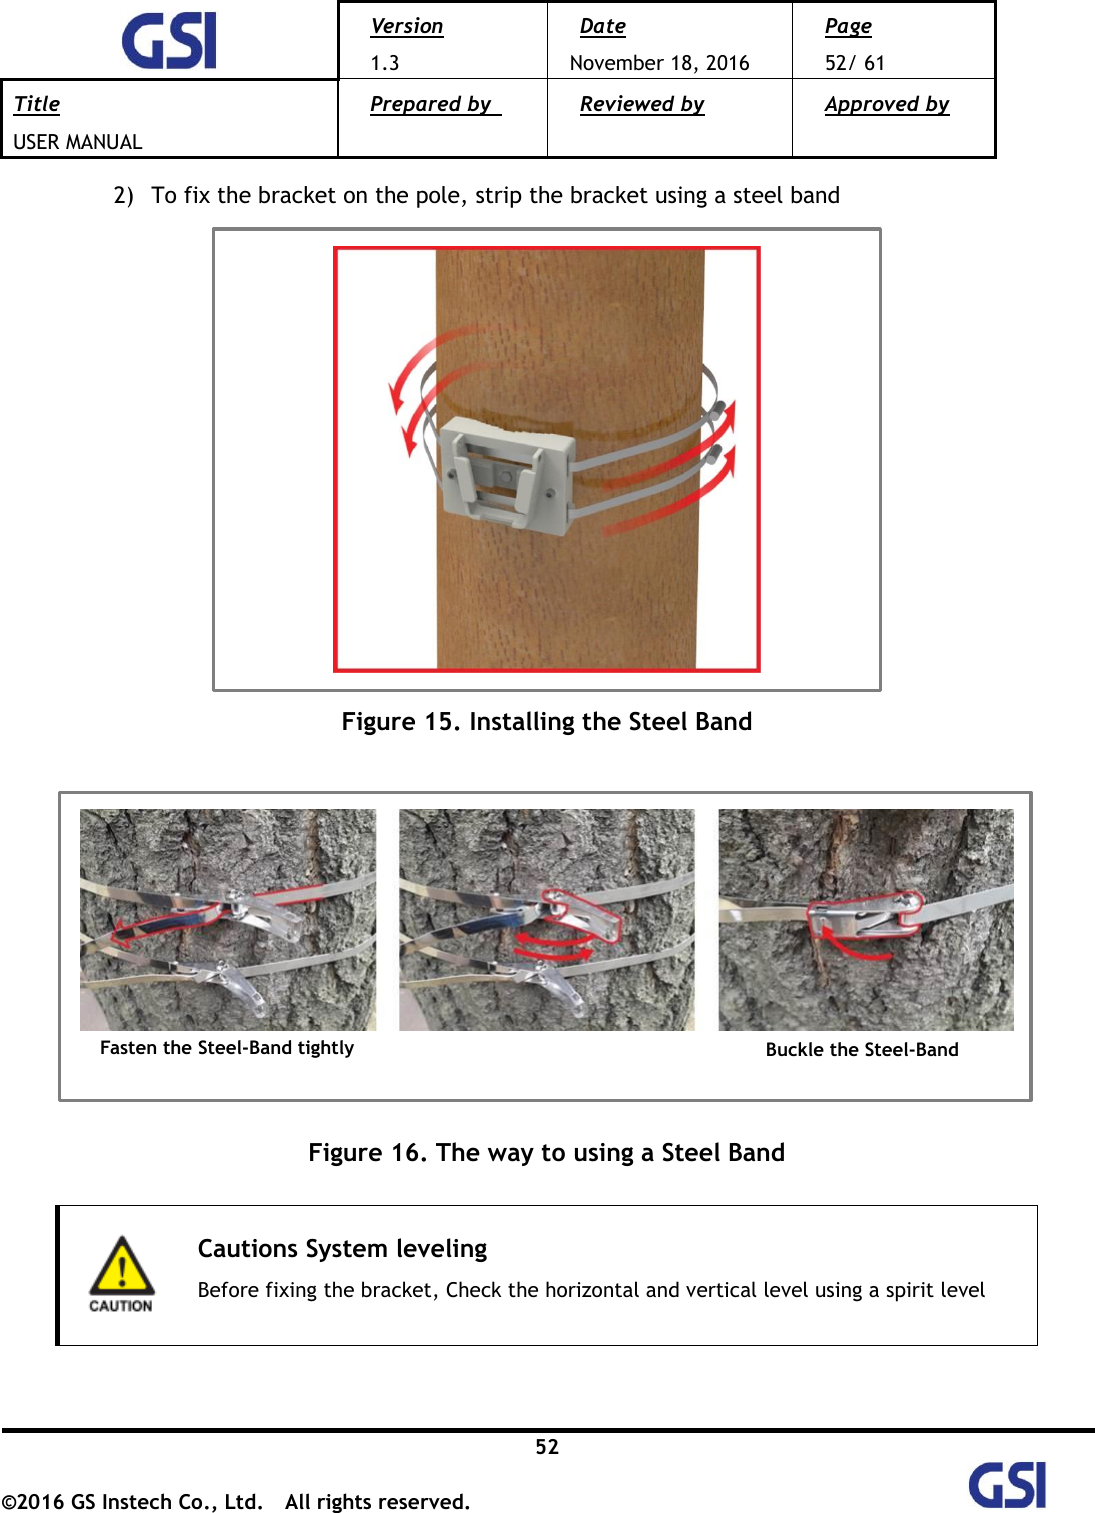  Version 1.3 Date November 18, 2016 Page 52/ 61 Title USER MANUAL Prepared by   Reviewed by  Approved by   52 ©2016 GS Instech Co., Ltd.  All rights reserved.   2) To fix the bracket on the pole, strip the bracket using a steel band    Figure 15. Installing the Steel Band         Figure 16. The way to using a Steel Band   Cautions System leveling Before fixing the bracket, Check the horizontal and vertical level using a spirit level   Fasten the Steel-Band tightly Buckle the Steel-Band 